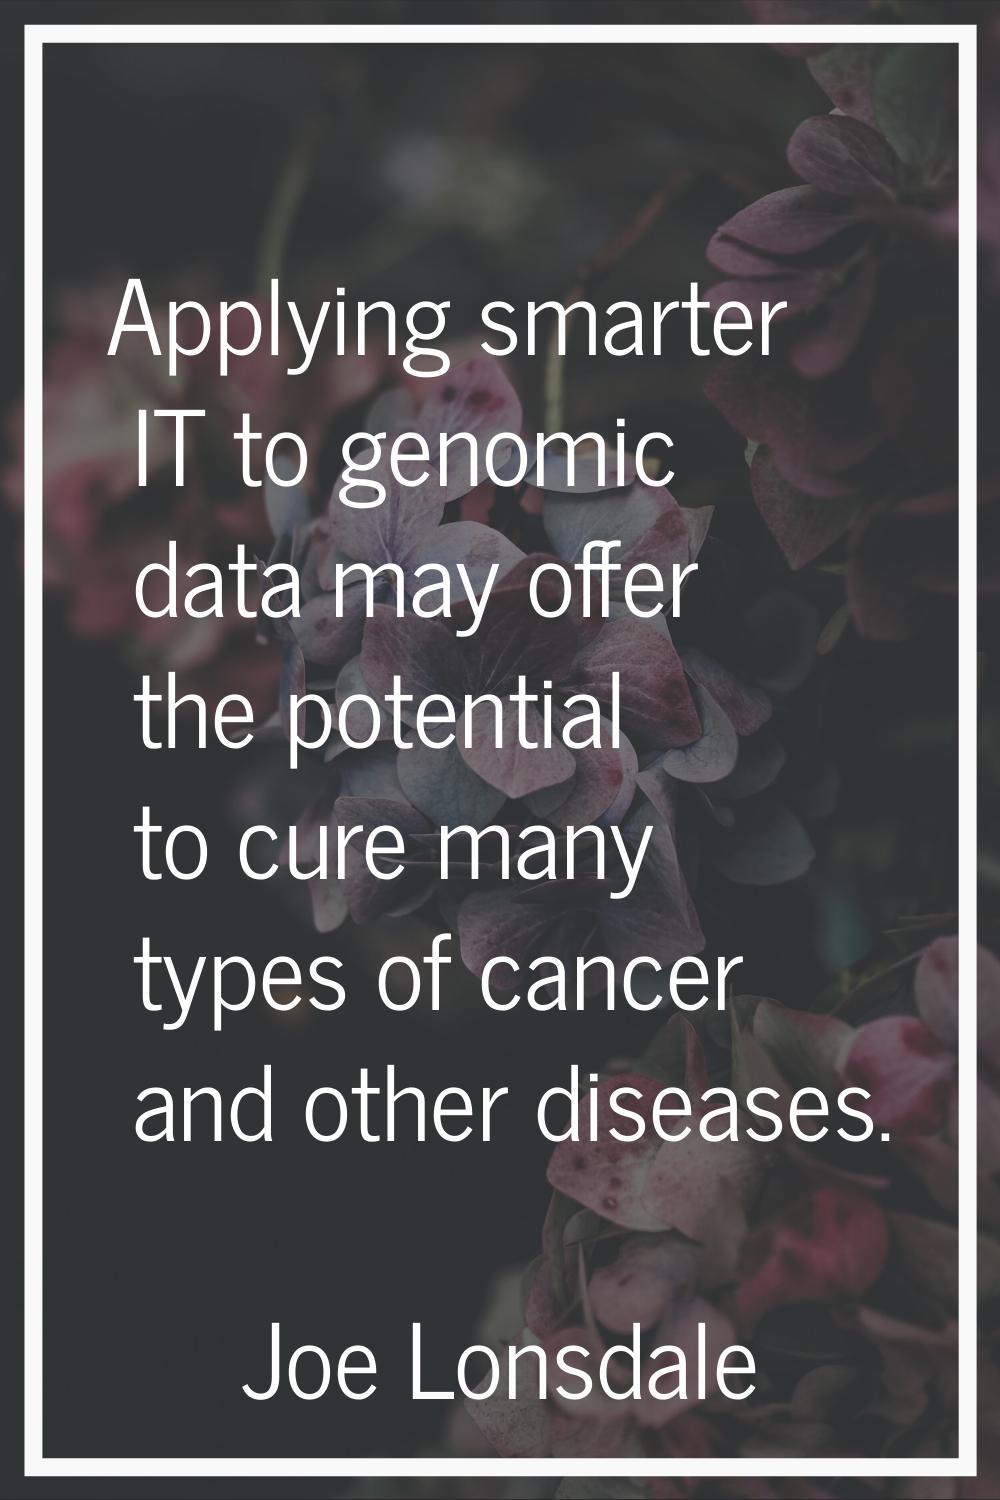 Applying smarter IT to genomic data may offer the potential to cure many types of cancer and other 